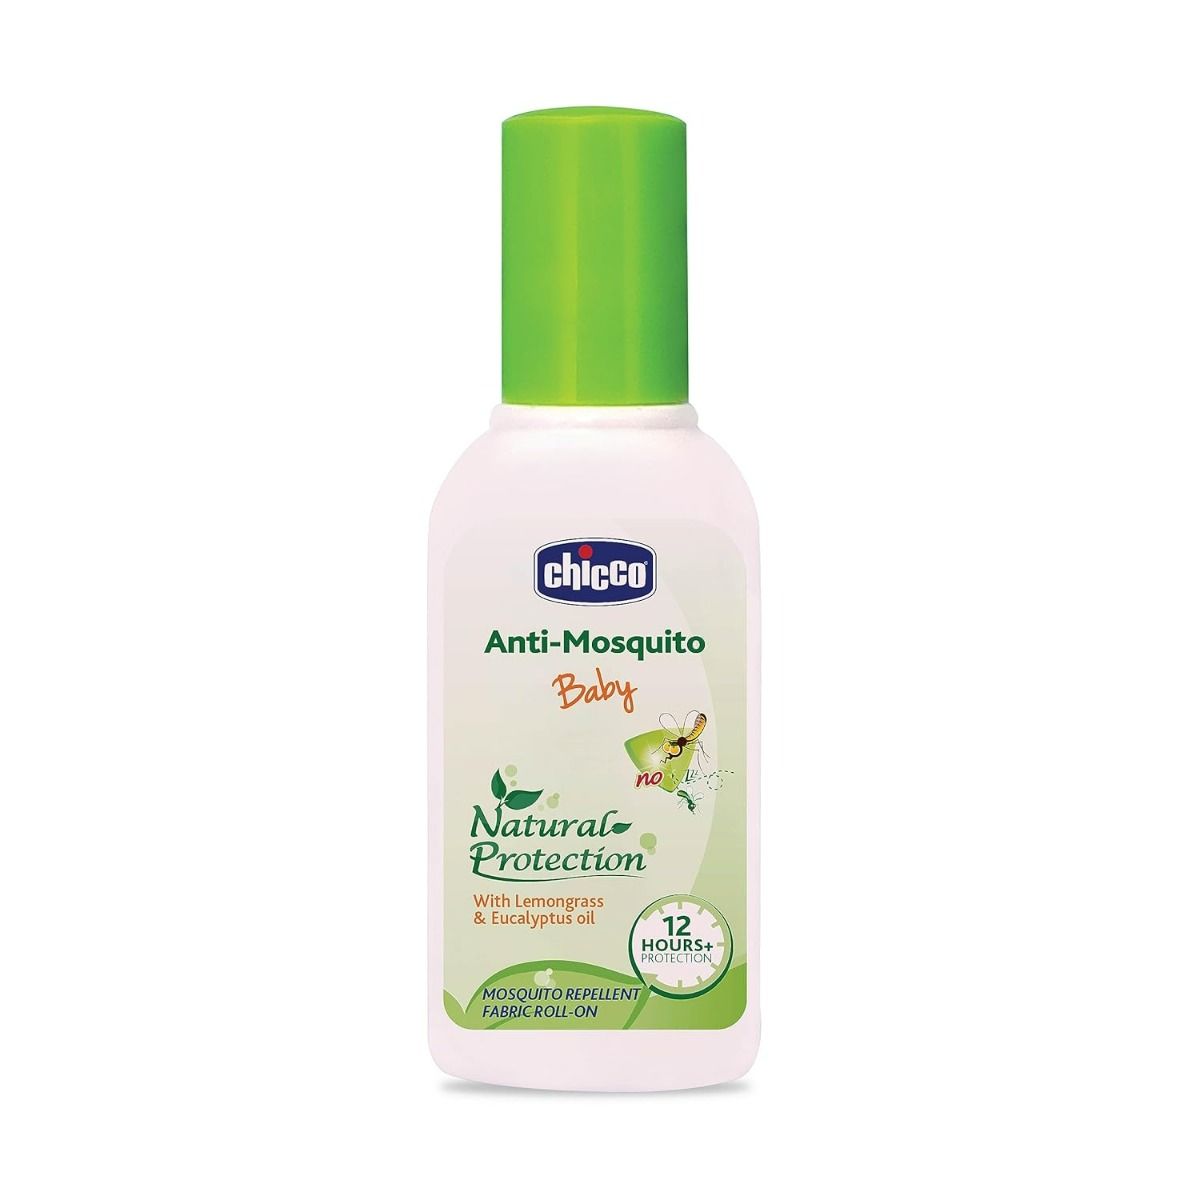 Buy Chicco Anti-Mosquito Baby Fabric Roll-On, 8 ml Online